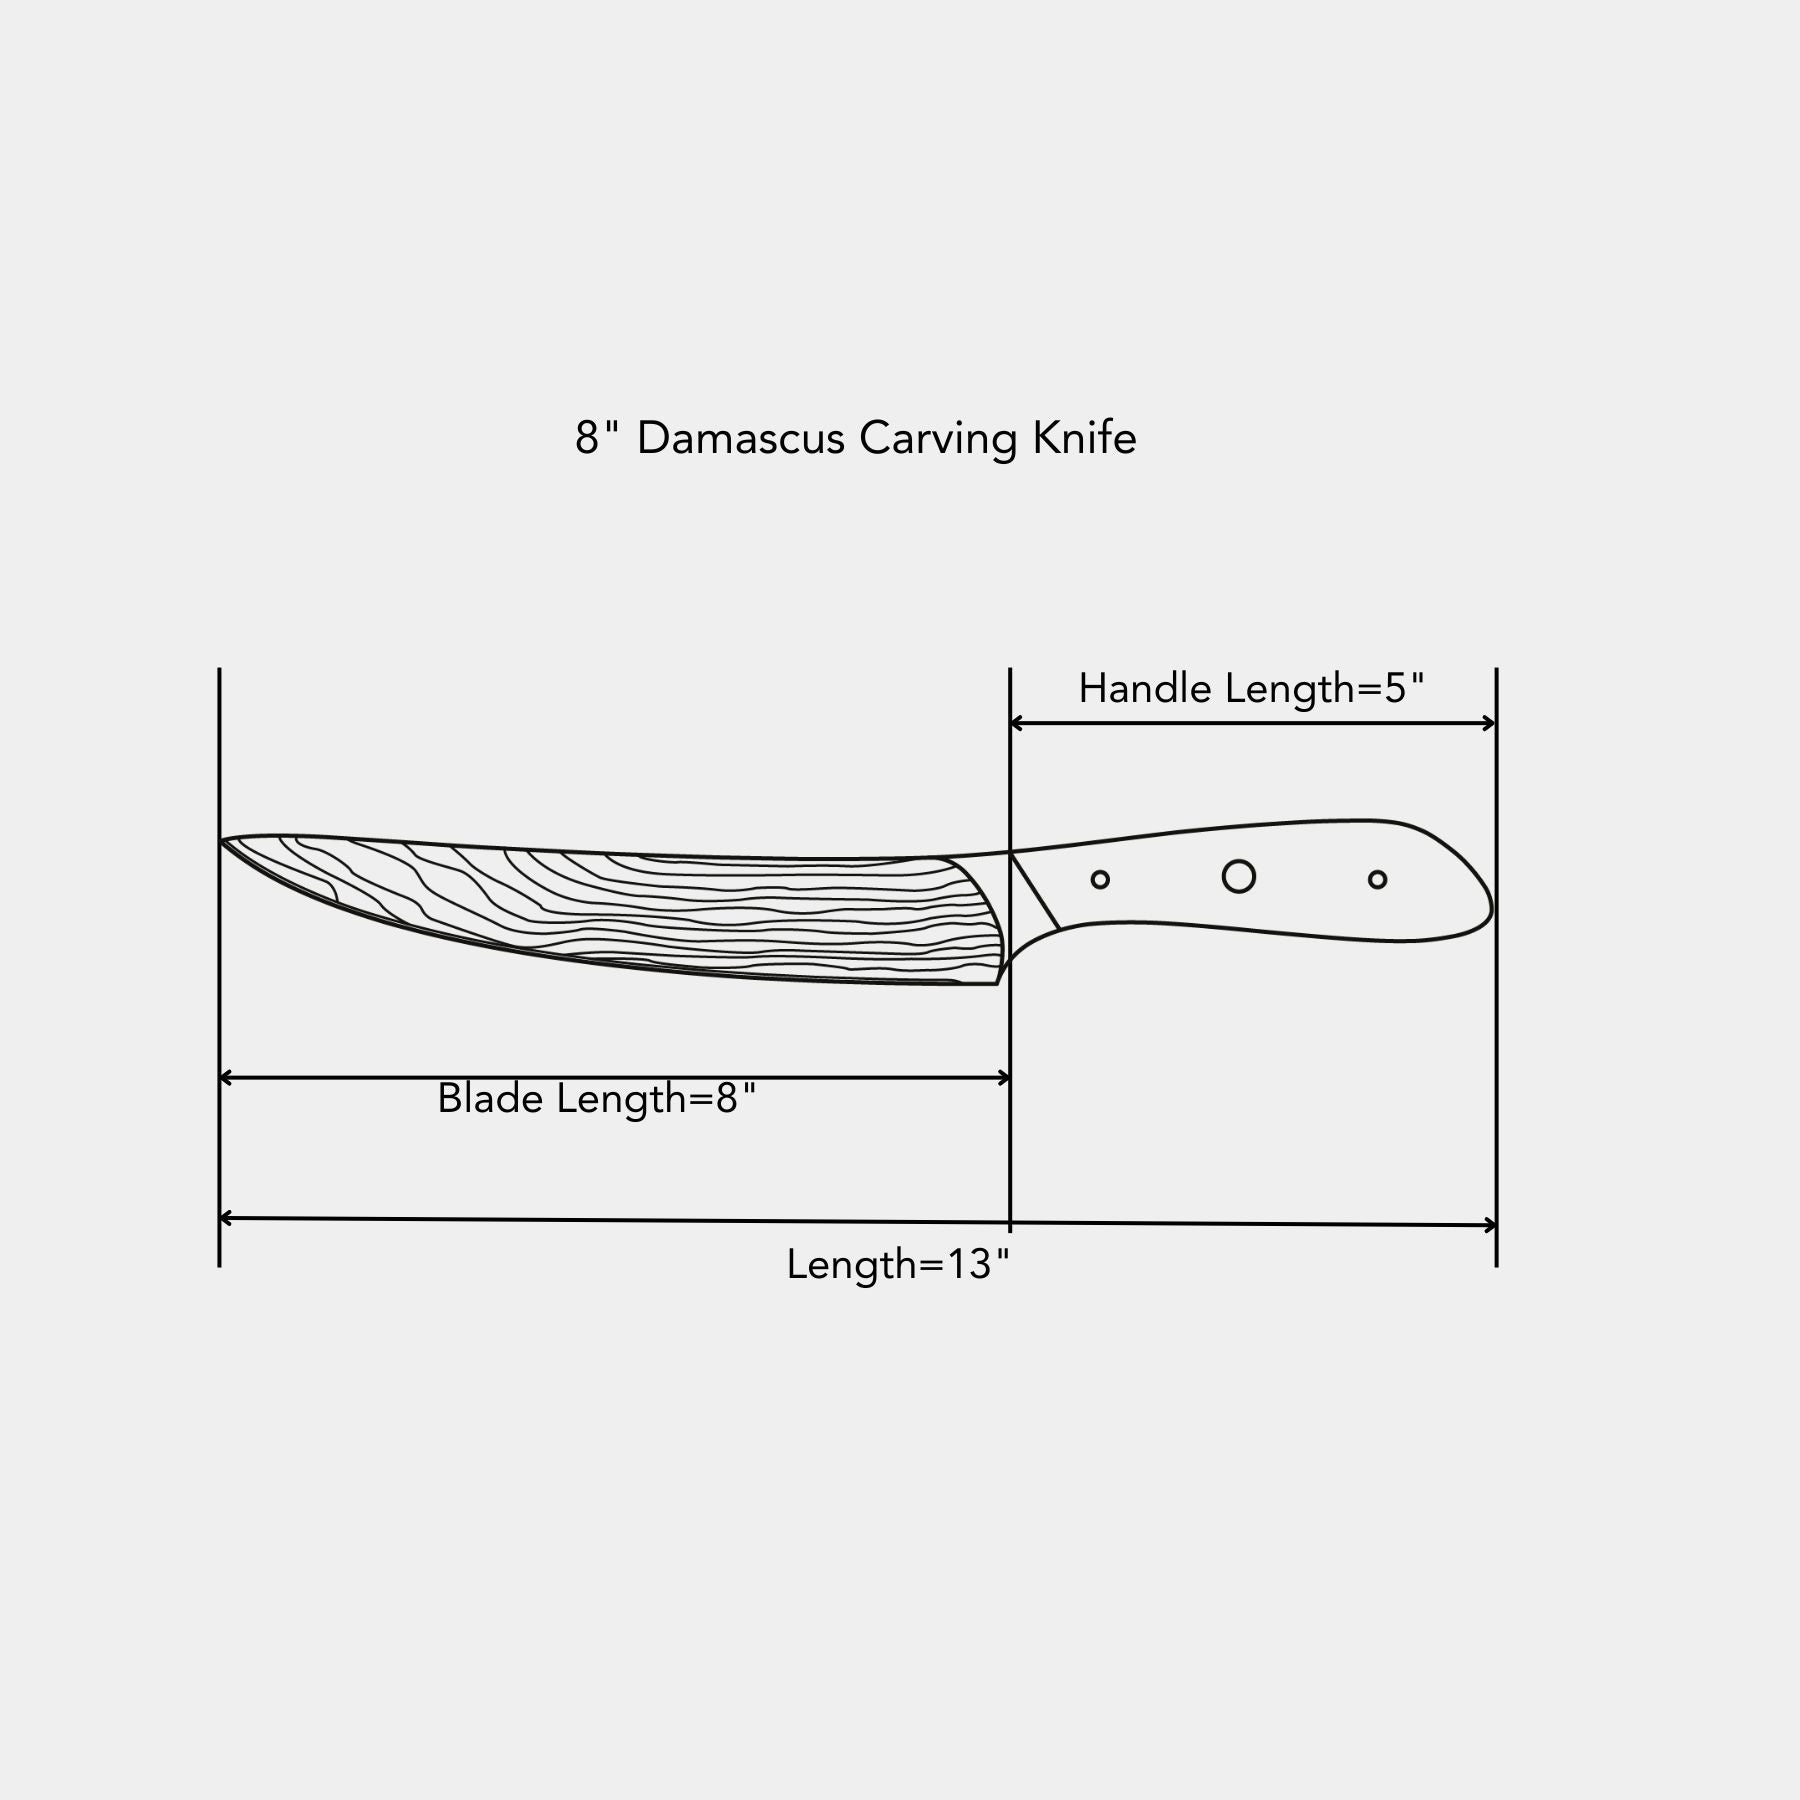 8" Damascus Carving Knife dimensions of blade and handle length